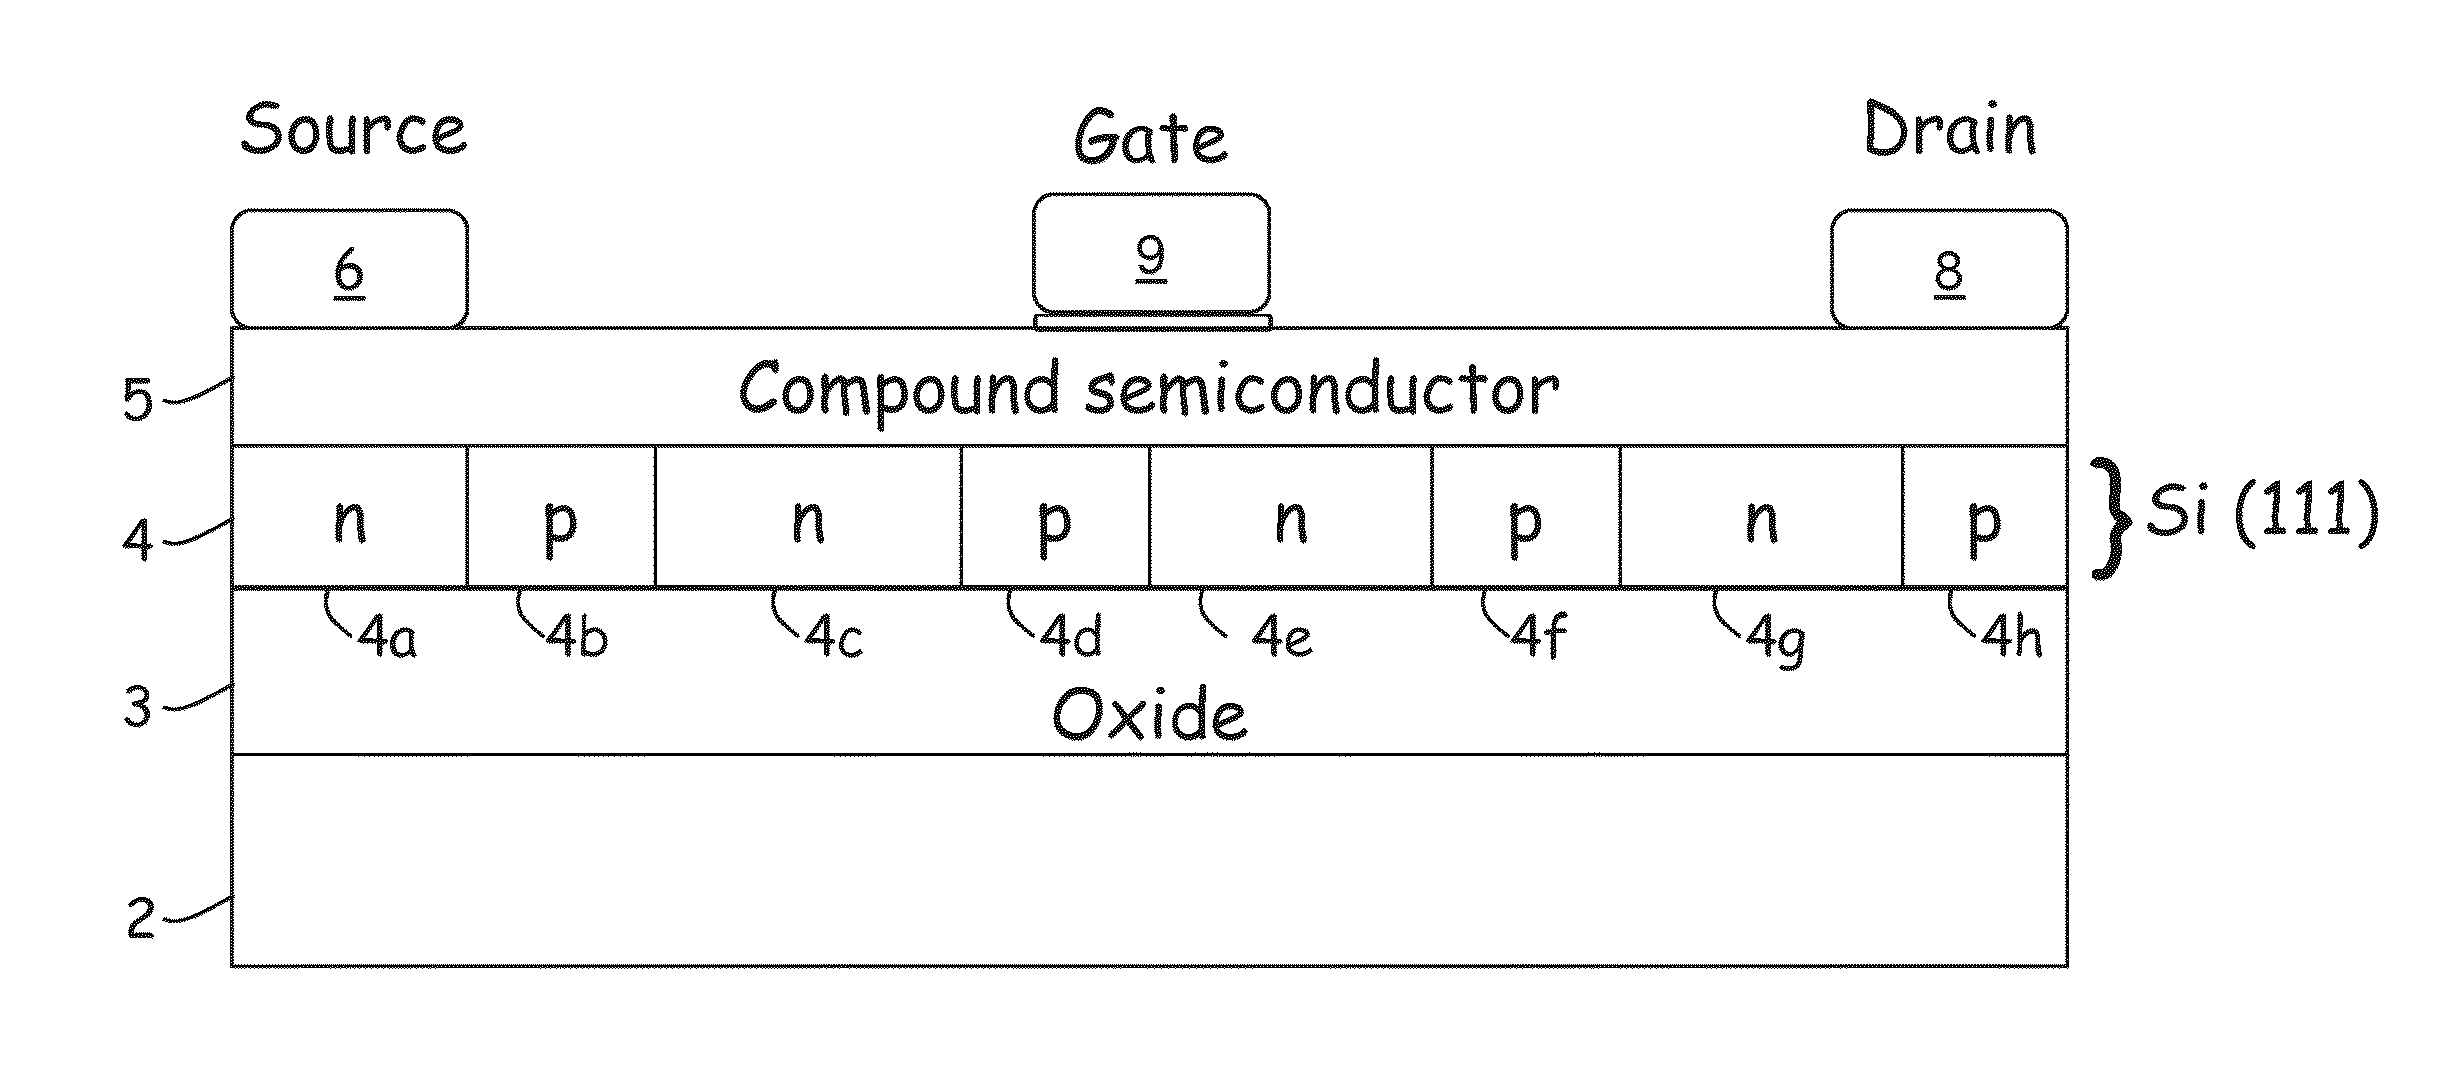 Reducing leakage current in semiconductor devices